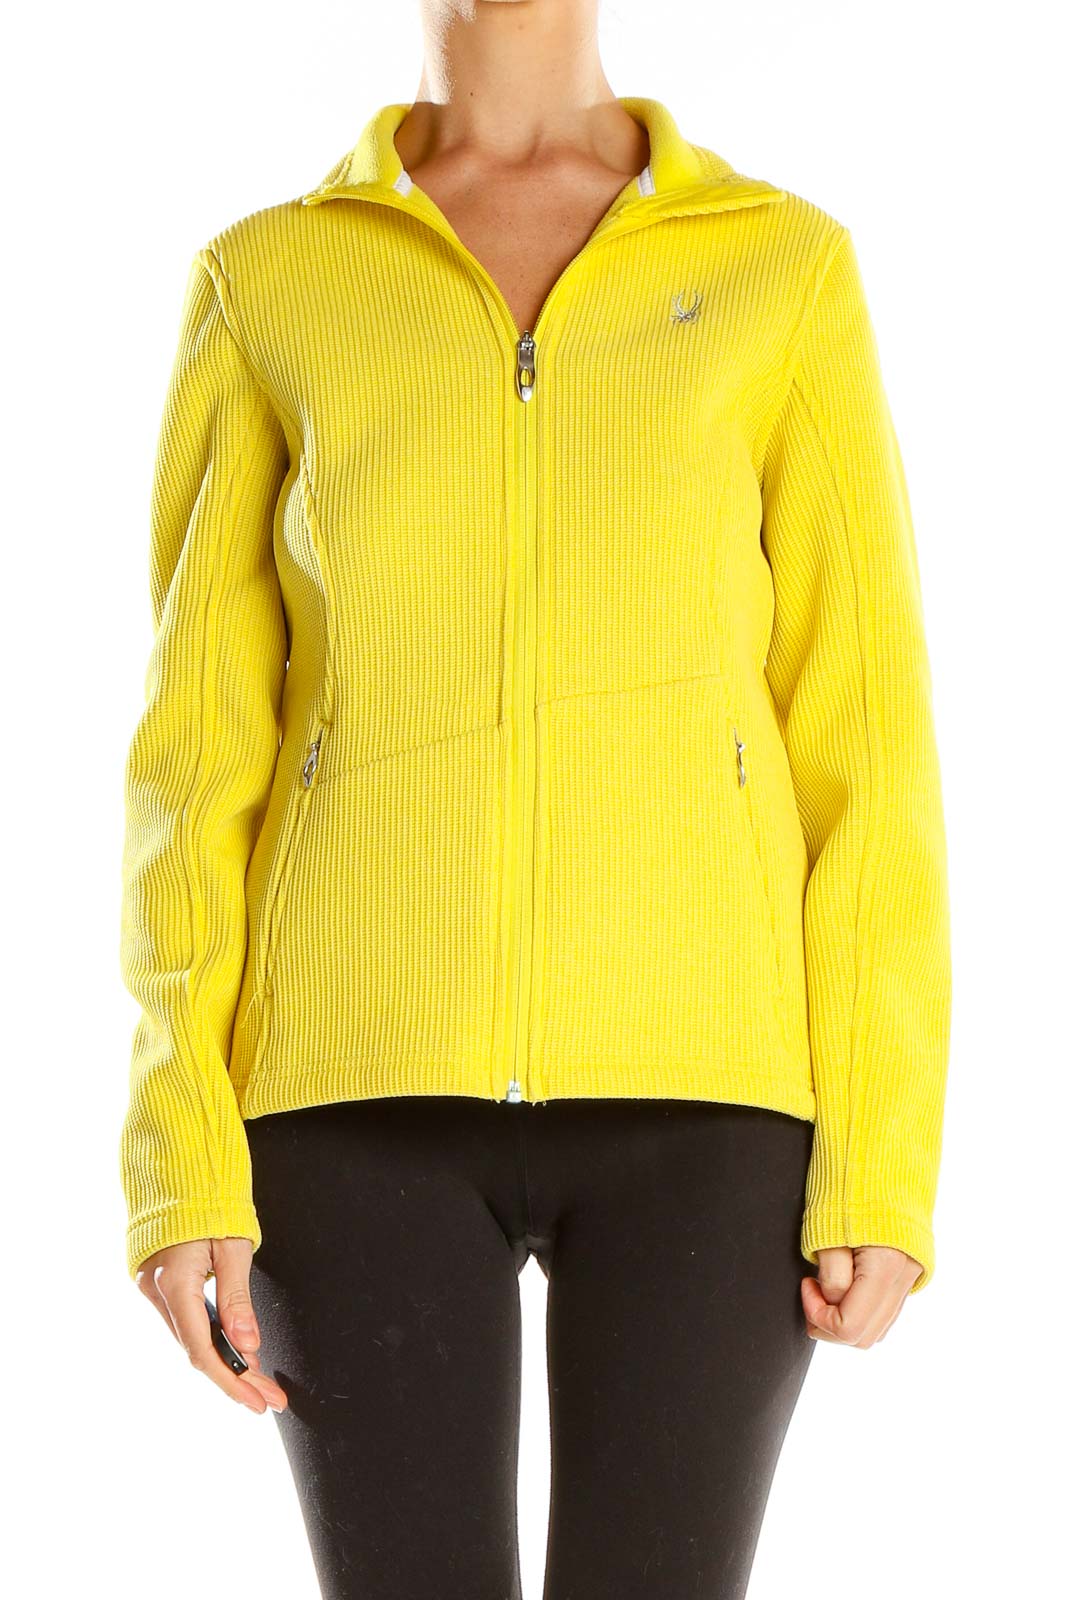 Yellow Sports Jacket Front